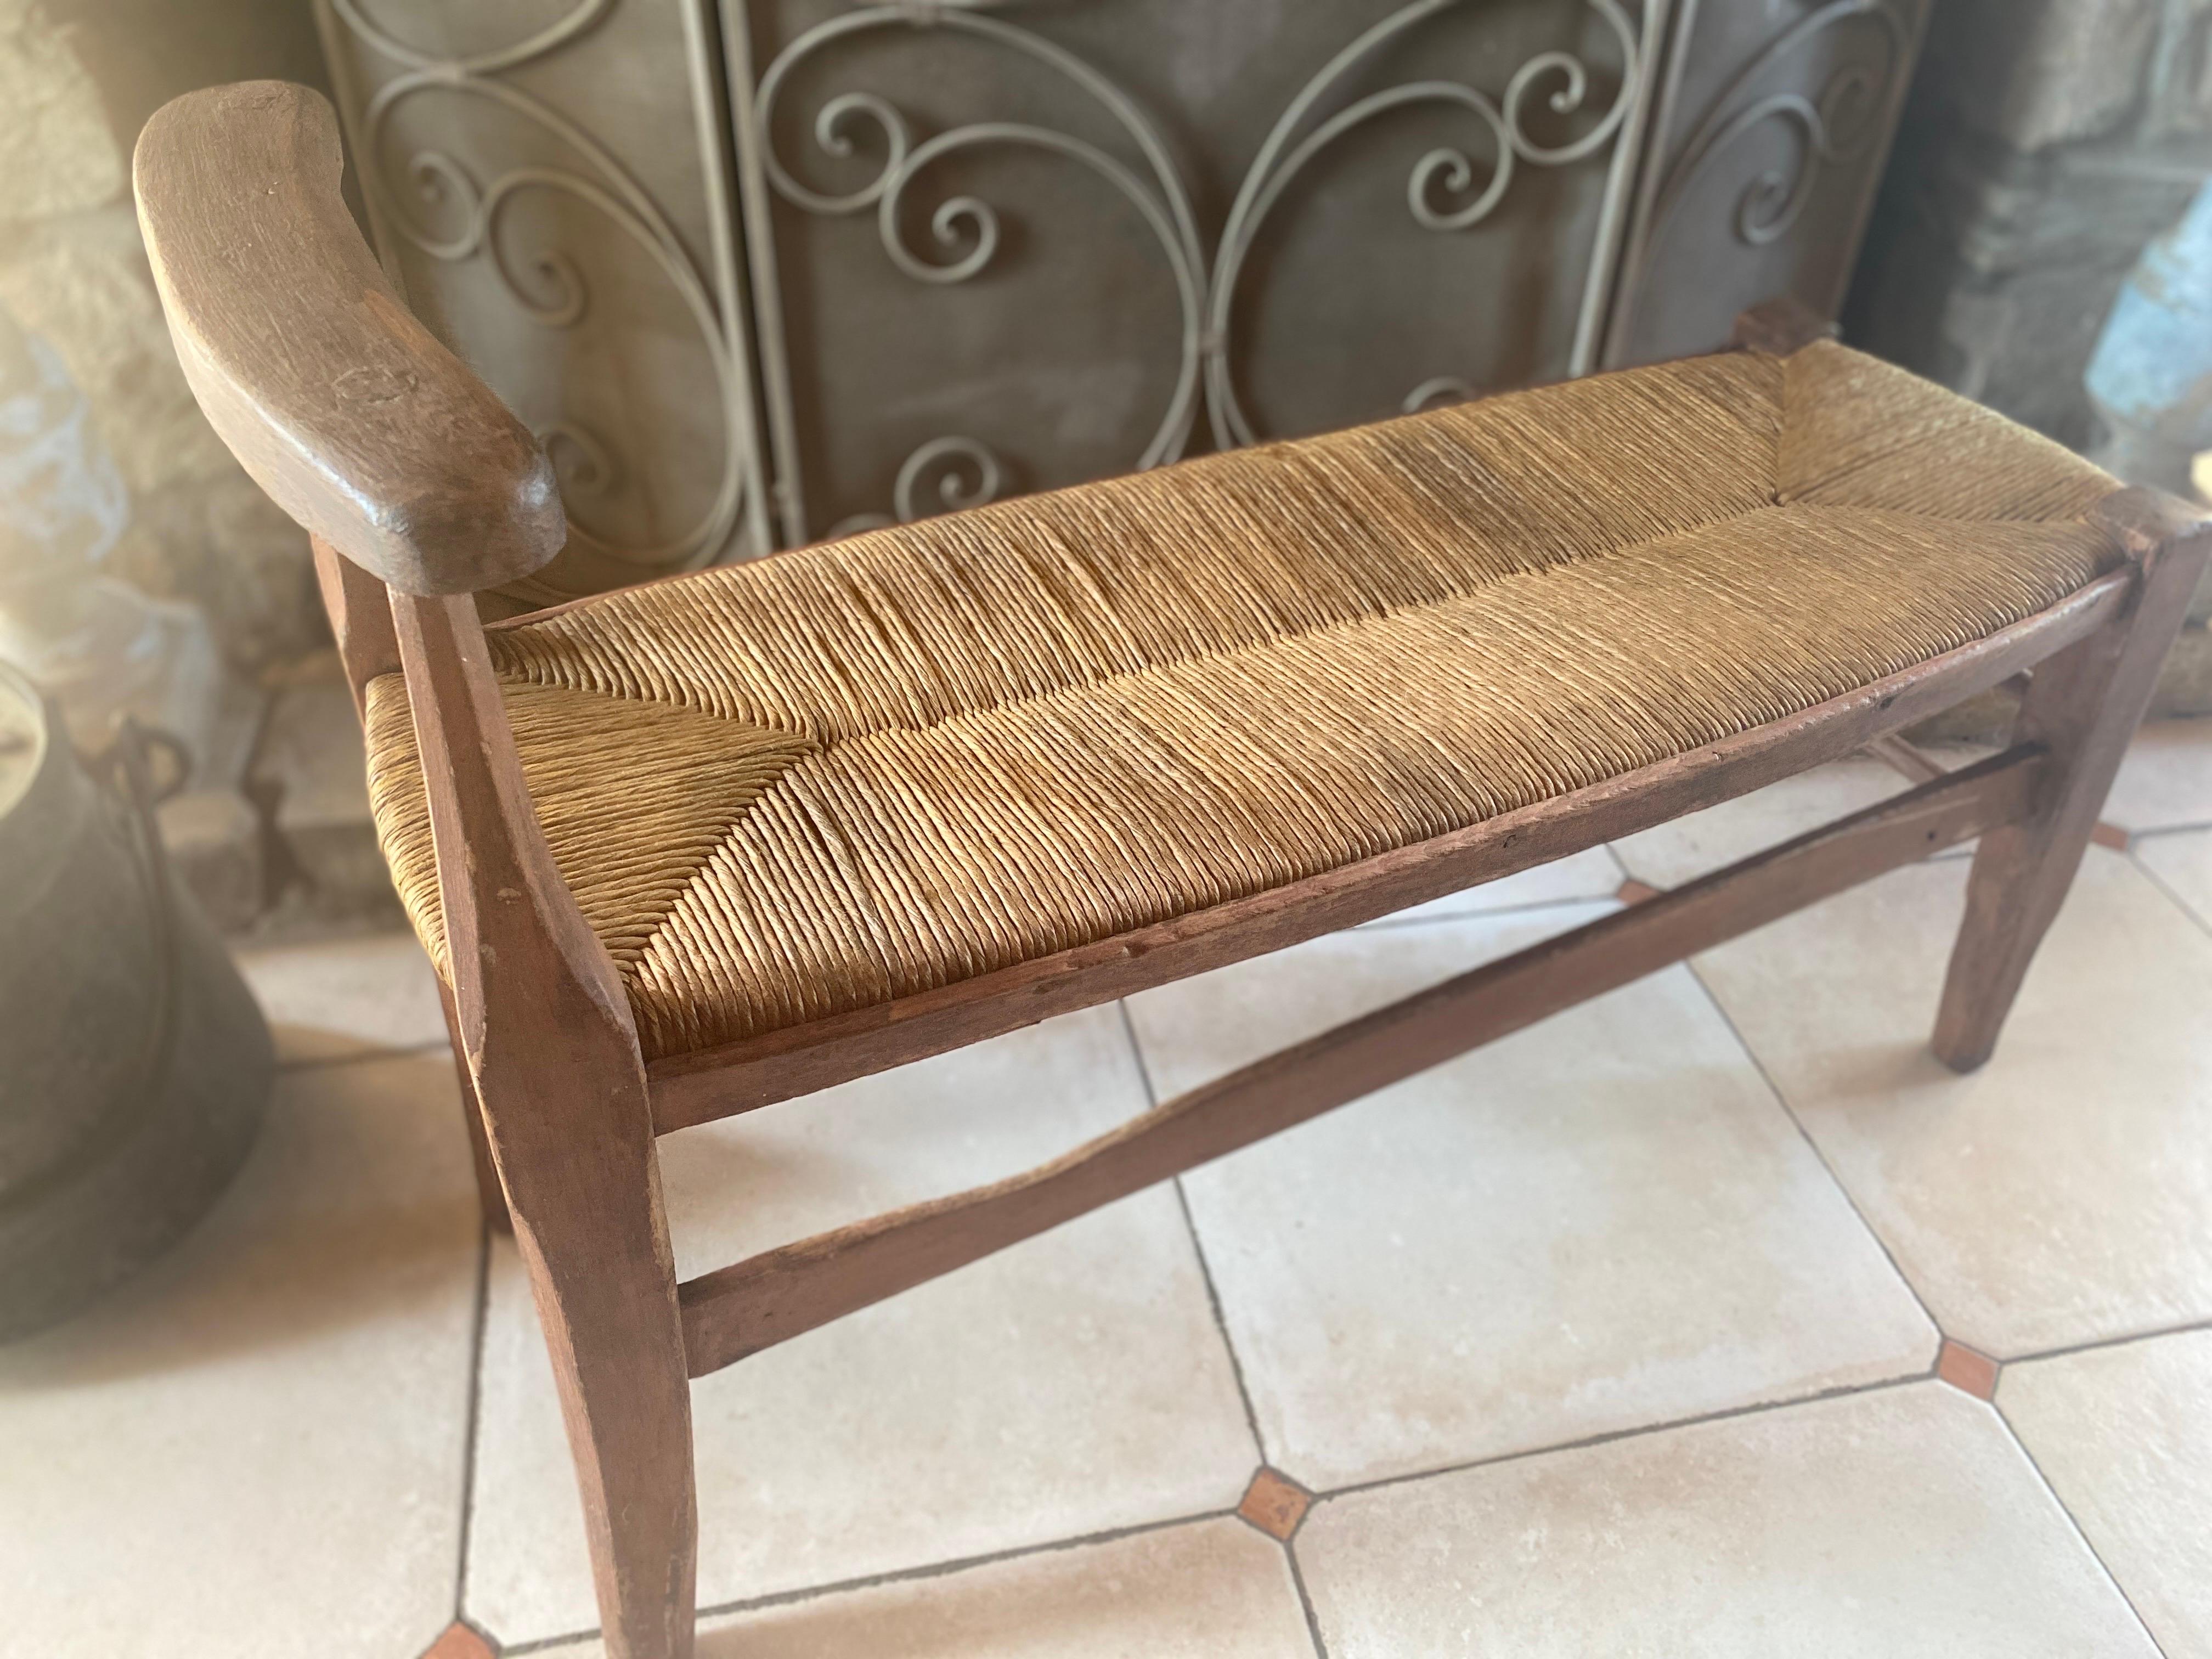 magnificent Cantou model bench dating from the 18th century with its original patina in perfect condition mulching has been redone from the south of France